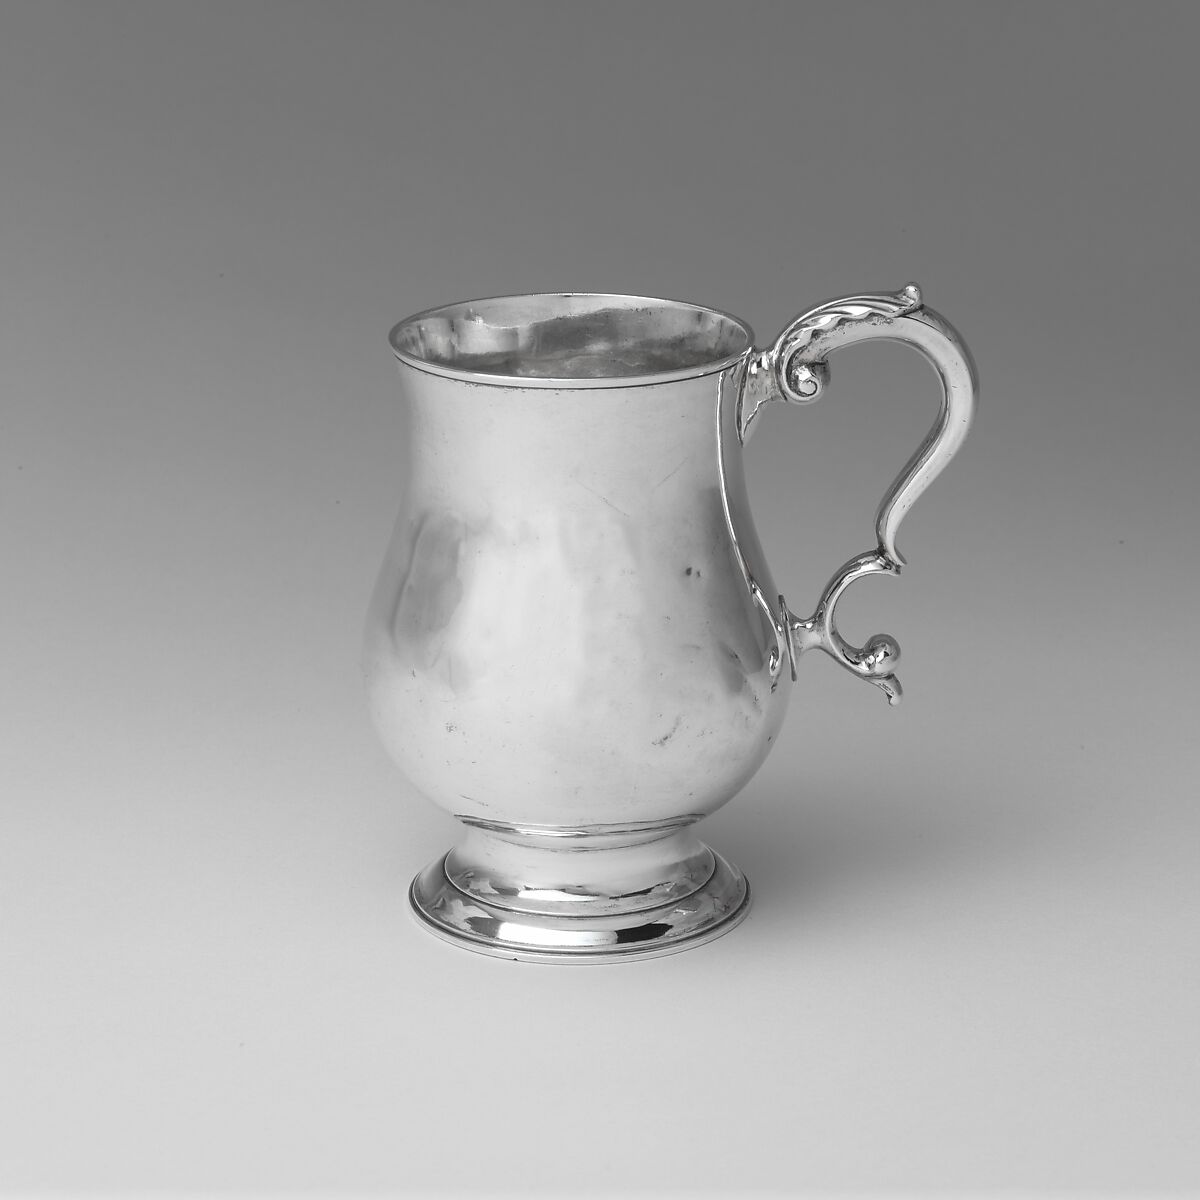 Cann, George Baker (active ca. 1811–1825), Silver, American 